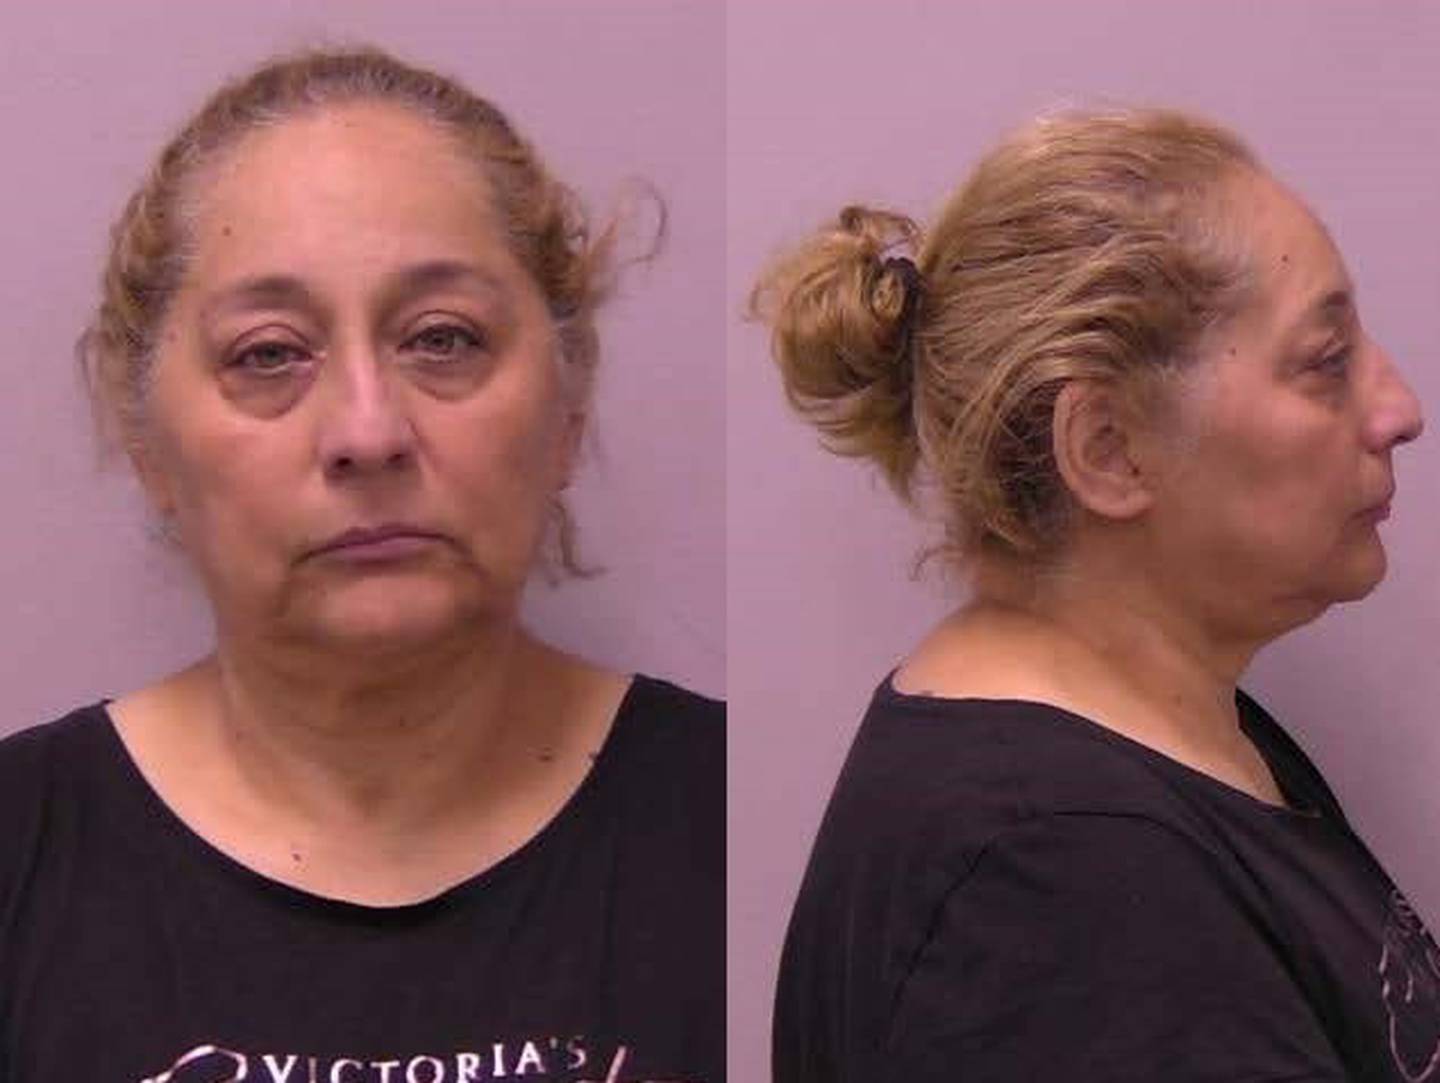 Martha Hurtado-Hernandez, 57, of Chicago was charged with Involuntary Servitude (Class X Felony),Trafficking in Persons (Class 1 Felony), Involuntary Servitude (Class 1 Felony), Involuntary Servitude (Class 4 Felony) and Promoting Prostitution.